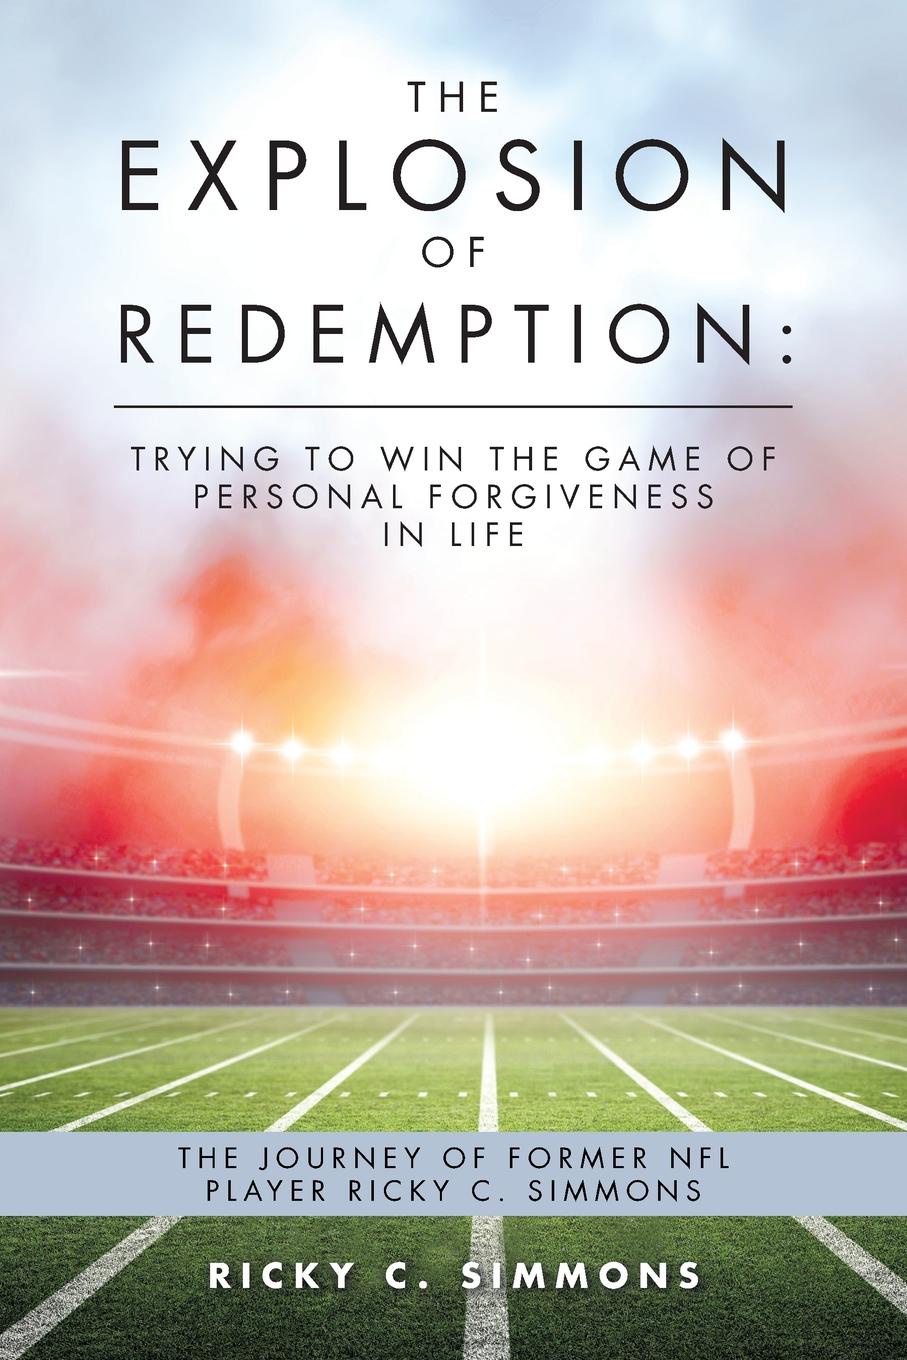 The Explosion of Redemption. Trying to Win the Game of Personal Forgiveness in Life: The Journey of Former NFL Player Ricky C. Simmons